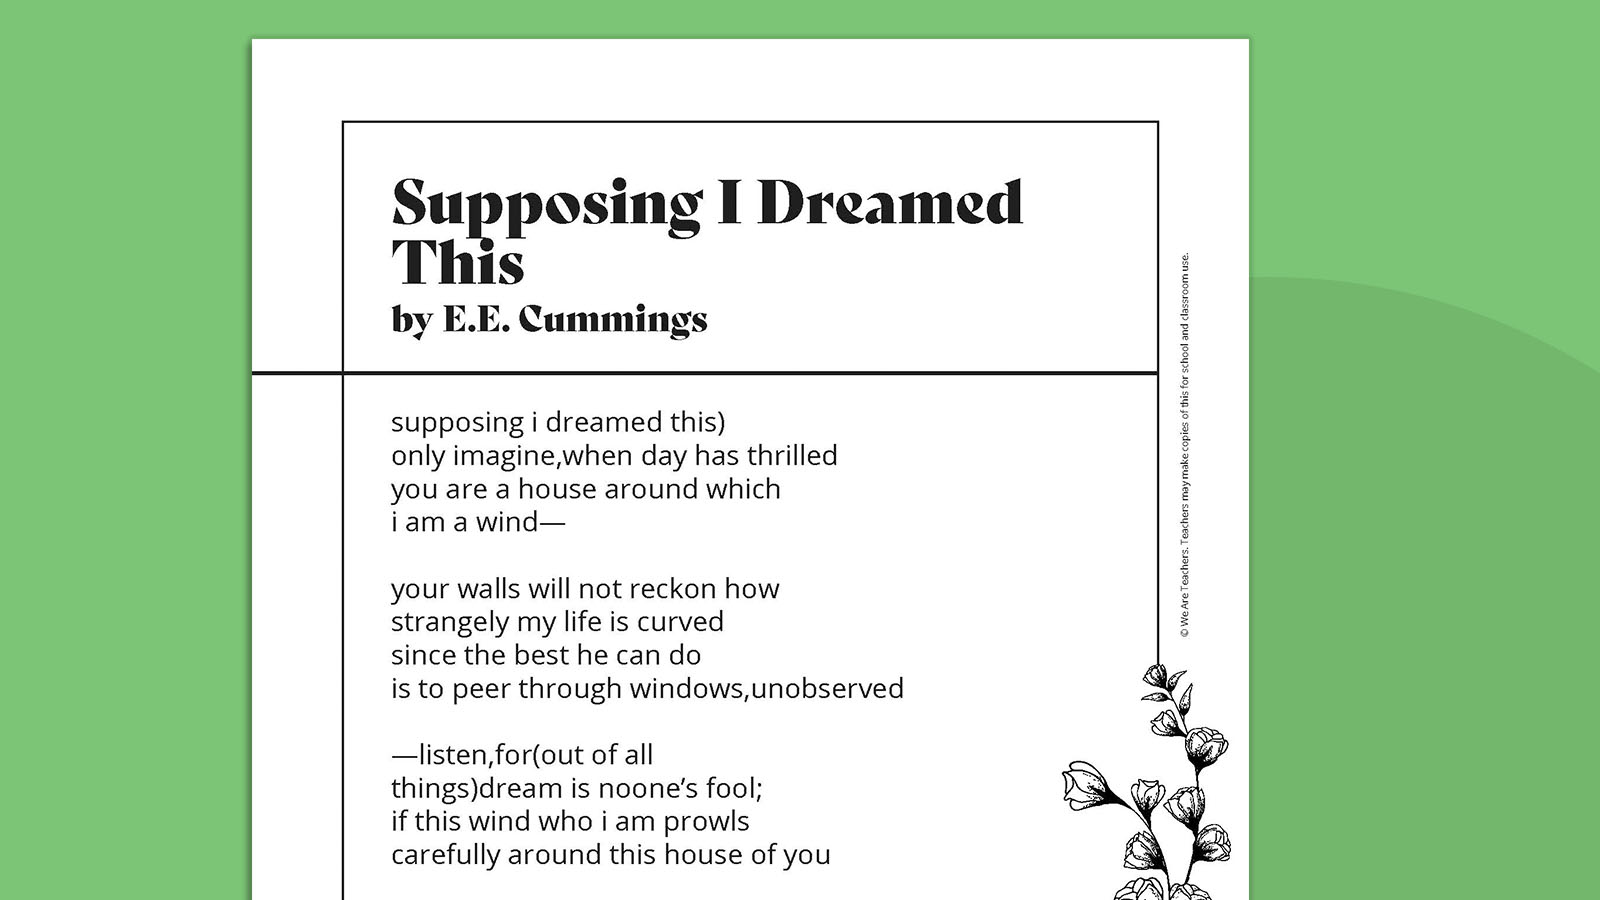 supposing i dreamed this)
only imagine,when the day has thrilled
you are a house around which
I am a wind—- E.E. Cummings poems